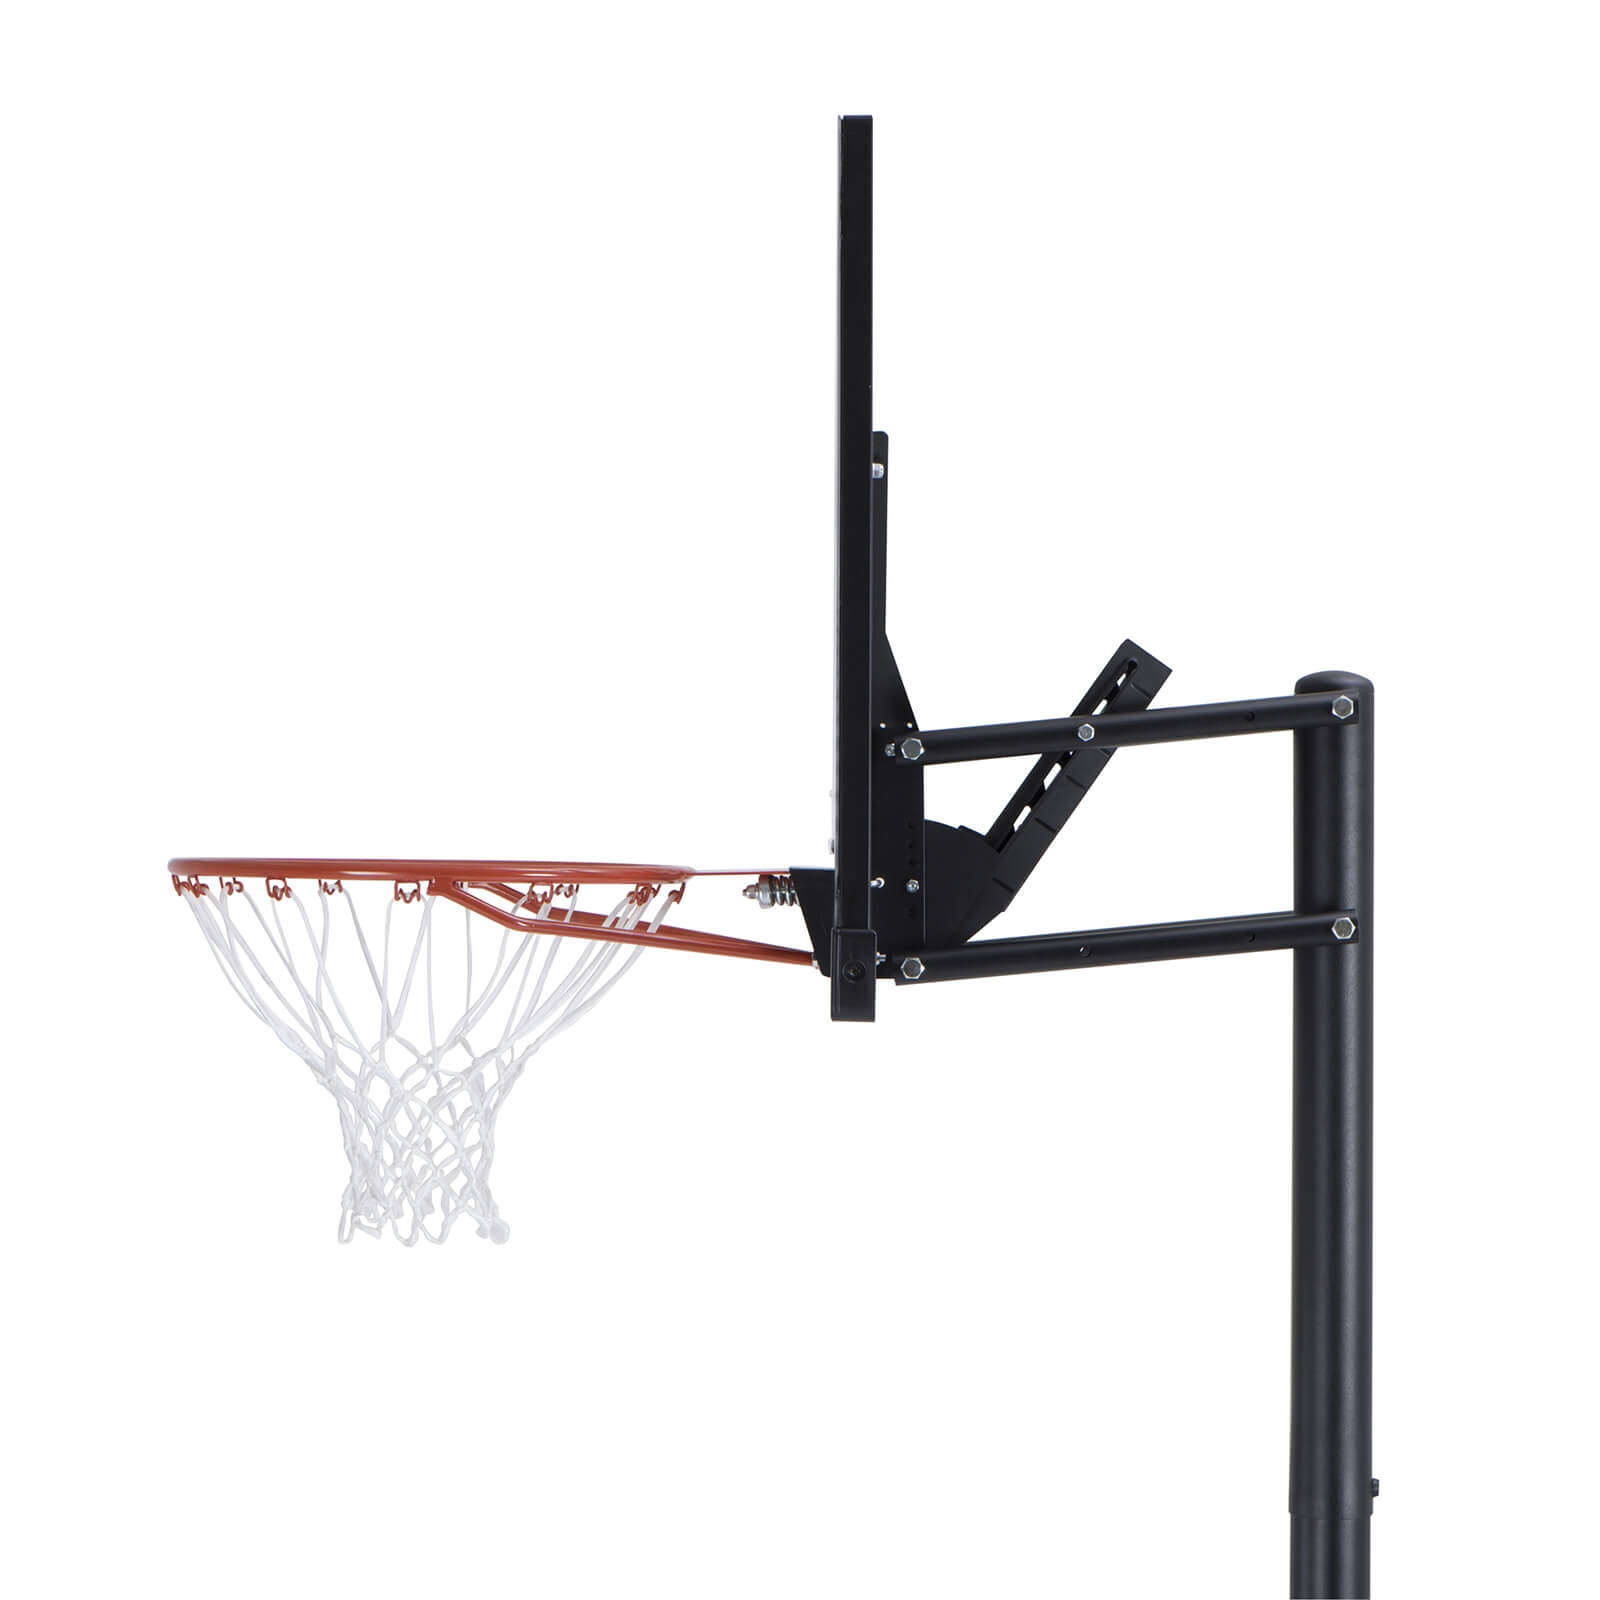 Lifetime 44 Front Court Portable Basketball System